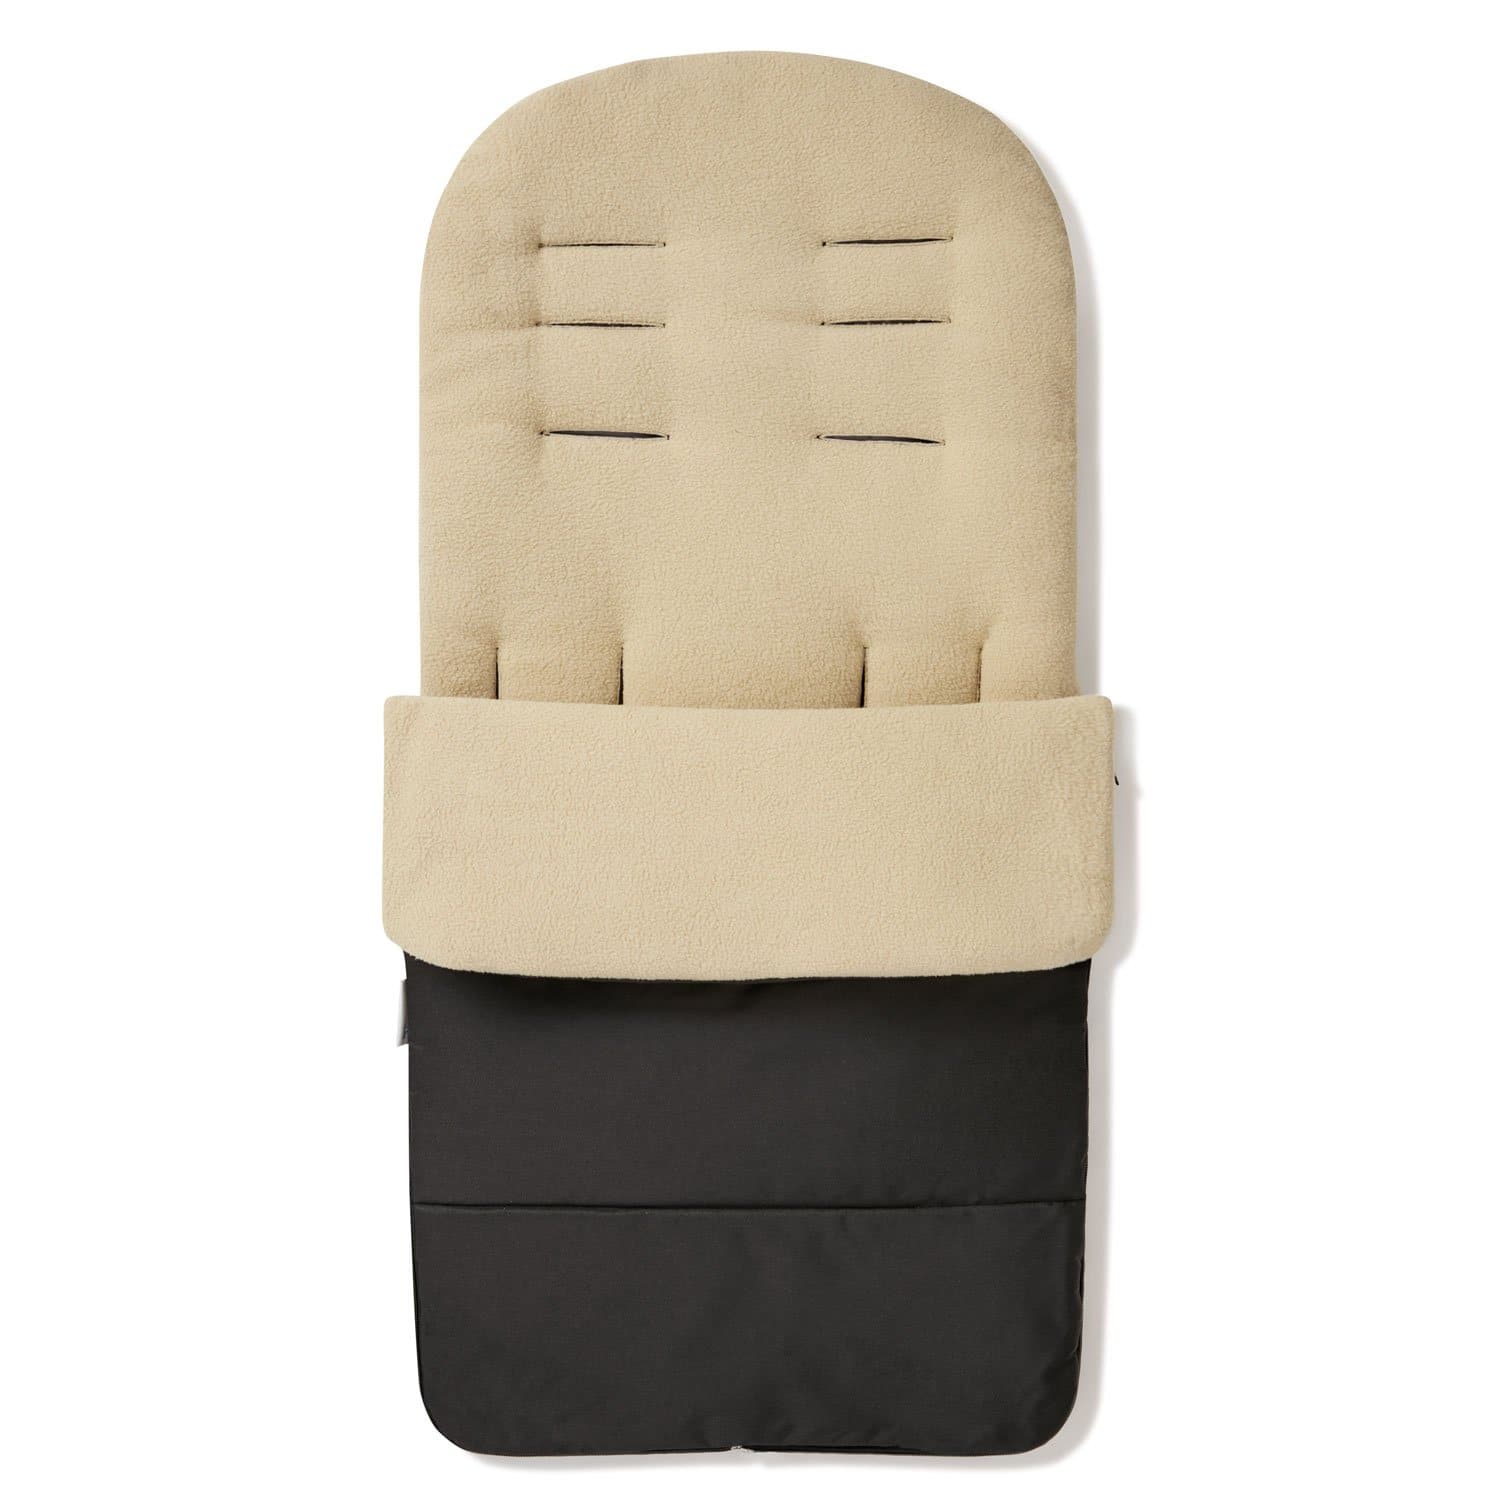 Premium Footmuff / Cosy Toes Compatible with Chicco - Desert Sand / Fits All Models | For Your Little One